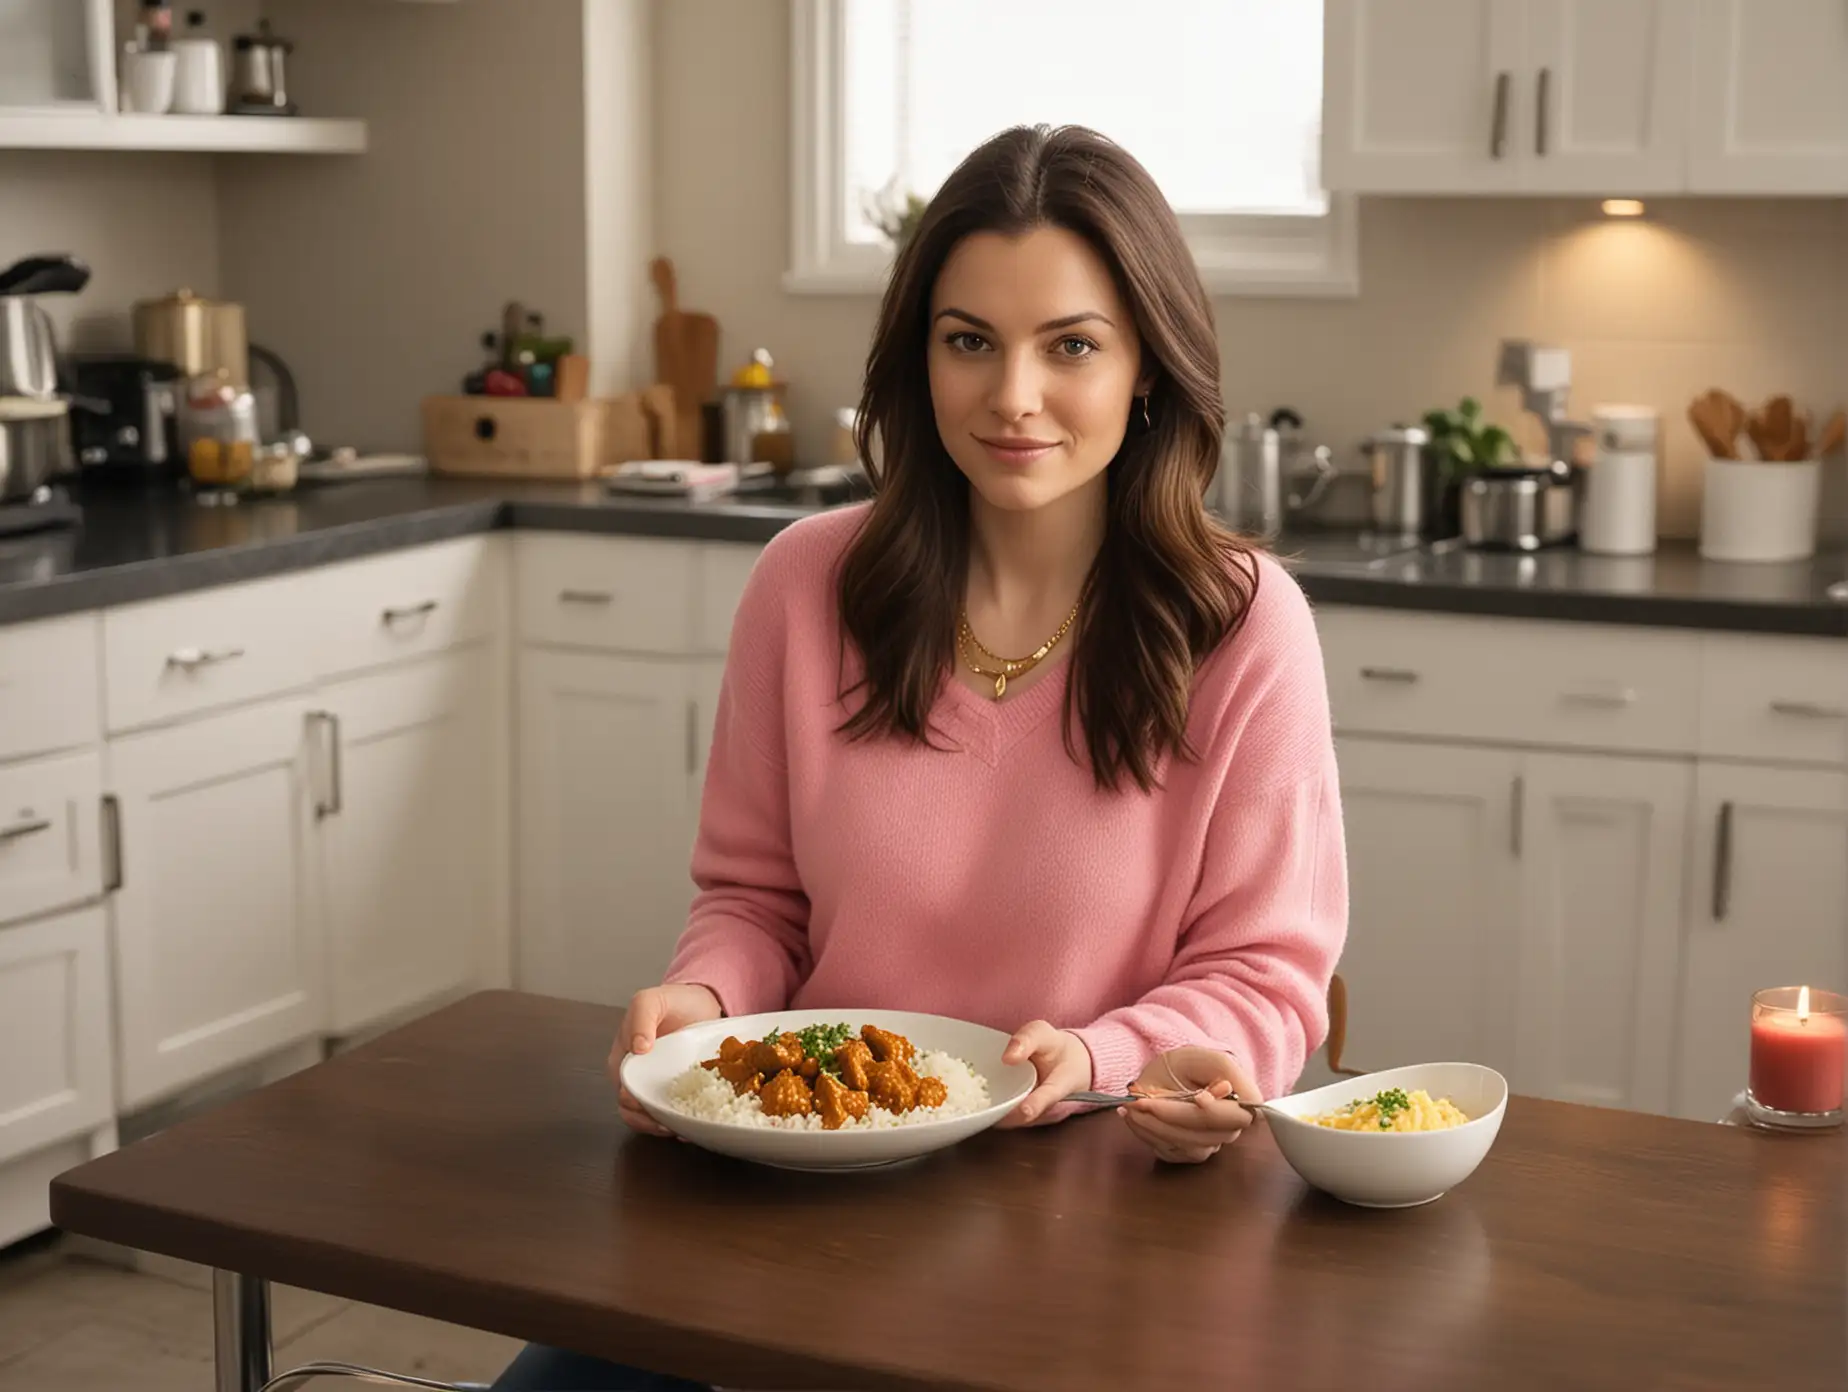 30 year old pale white woman with long dark brown hair blowout style parted to the right, pink sweater, gold necklace and blue jeans. She is seated in a chair next to kitchen table. The table has one plate of butter chicken and one bowl of white rice, high rise urban apartment background at night